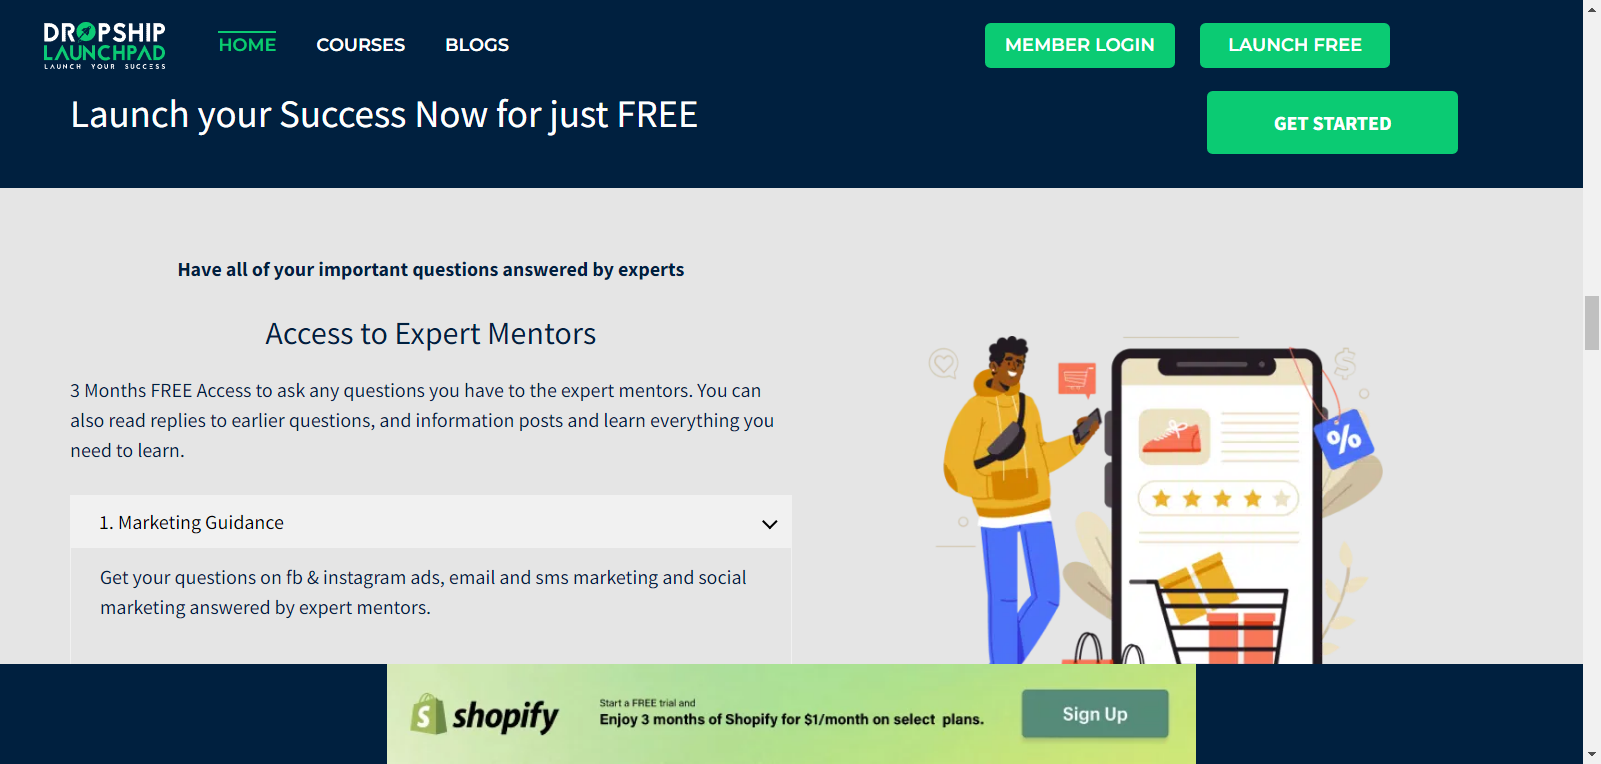 Launch Your DROPSHIP LAUNCHPAD  Turnkey Shopify Store